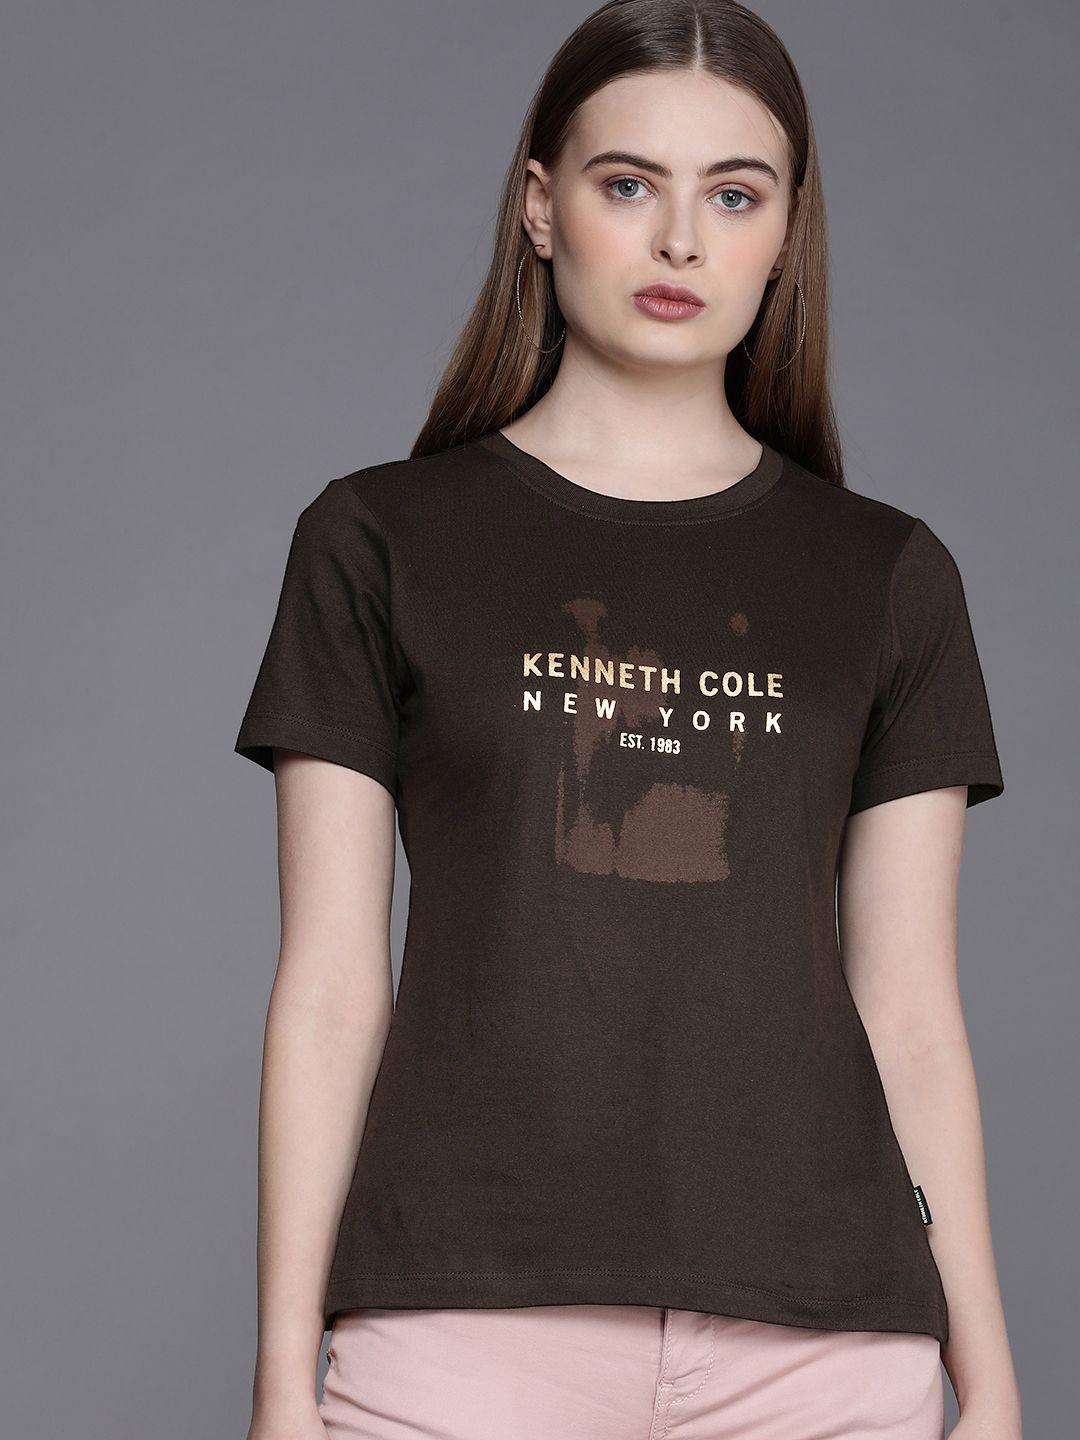 kenneth cole women brand logo printed pure cotton t-shirt